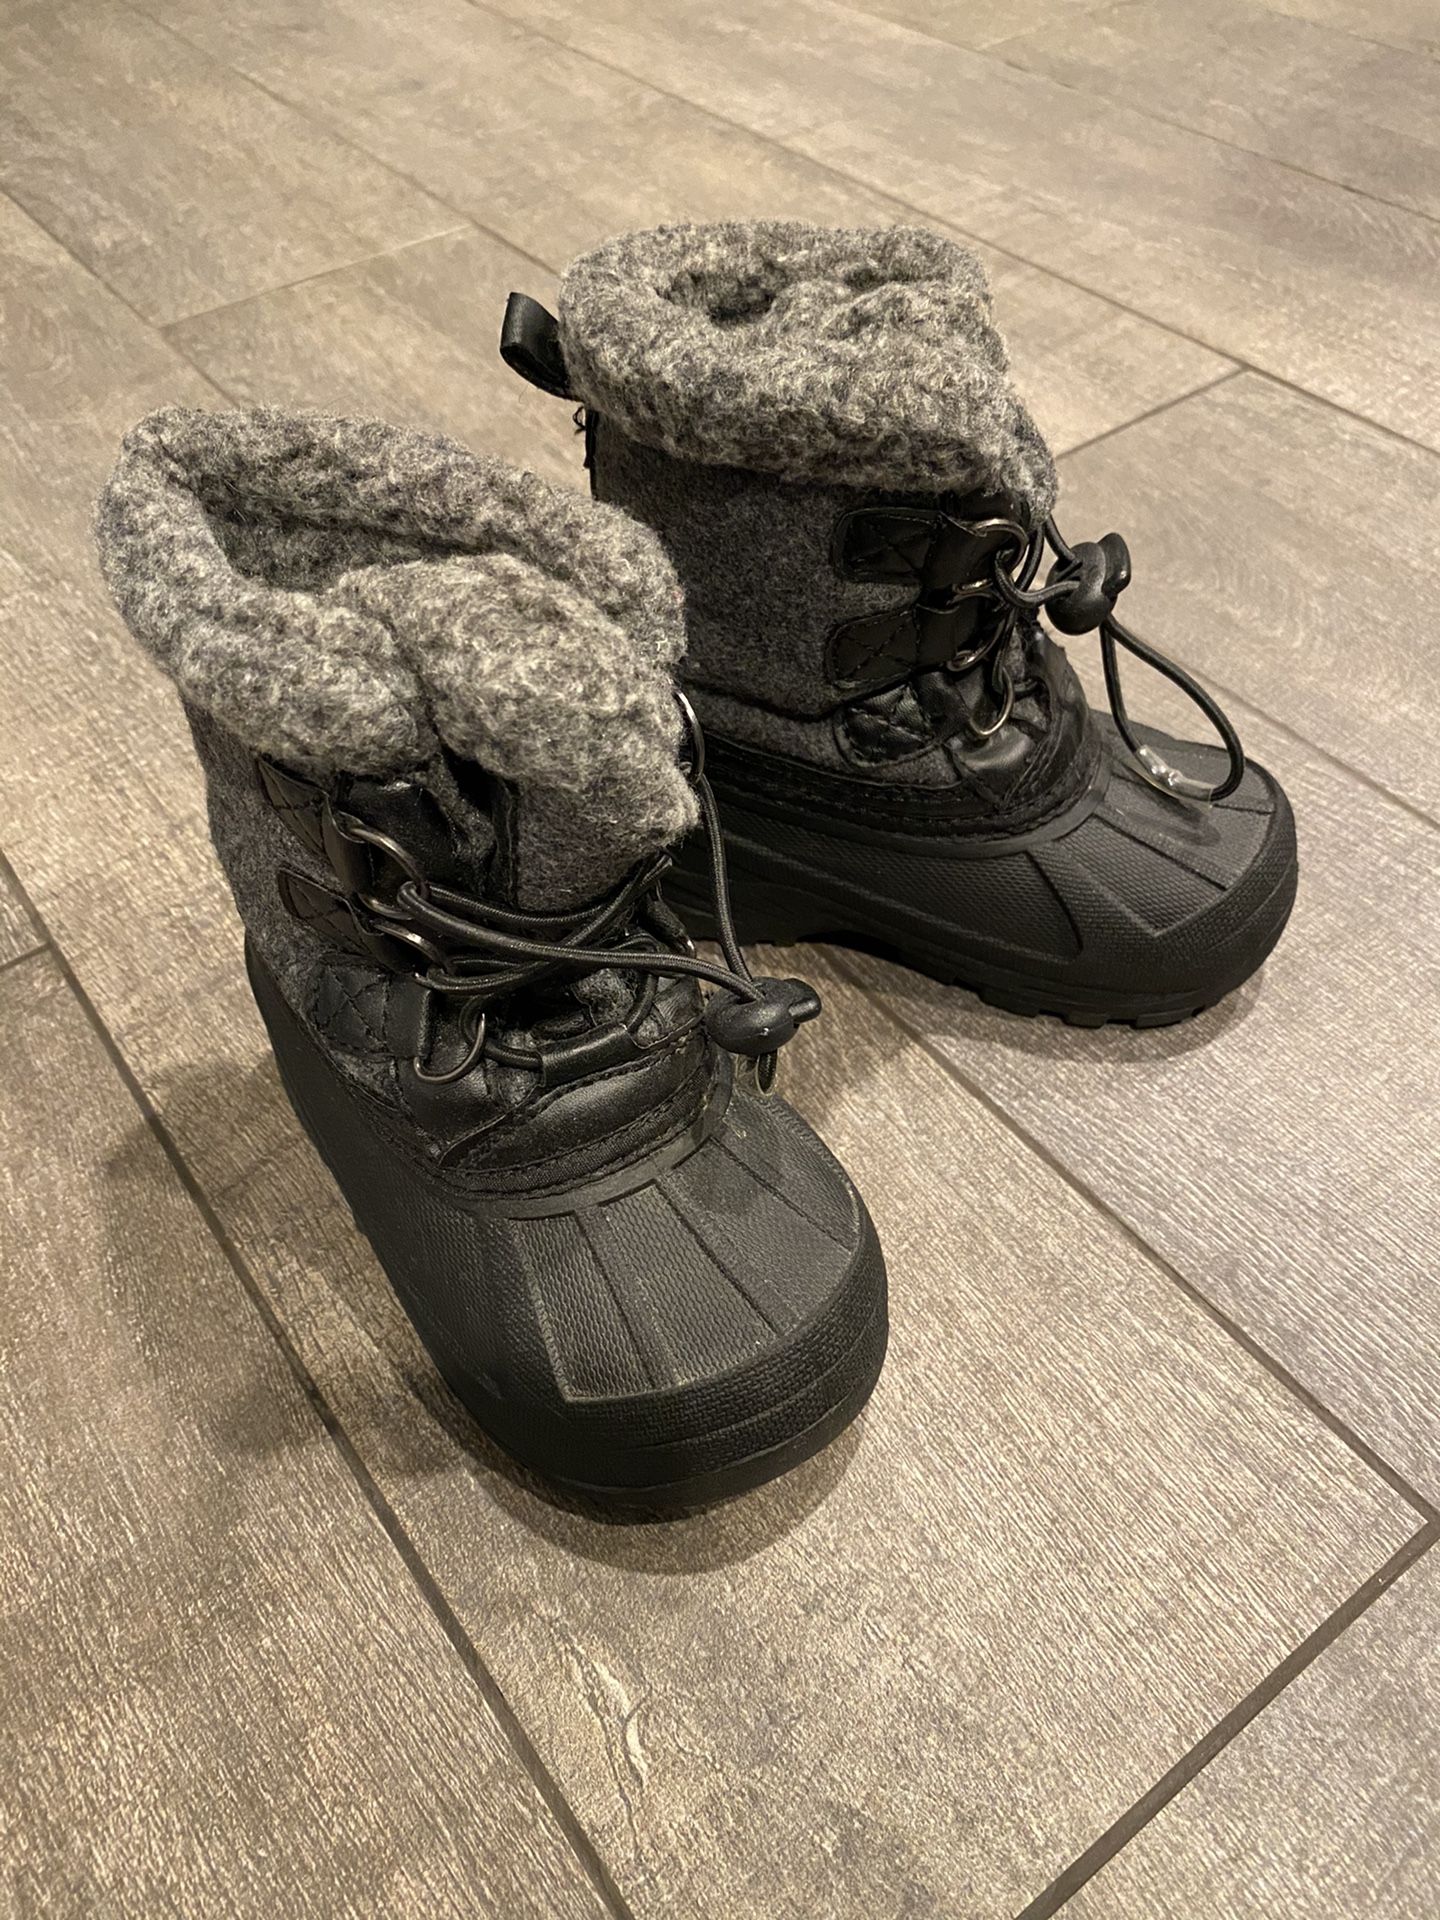 Toddler Size 5/6 Snow Boots